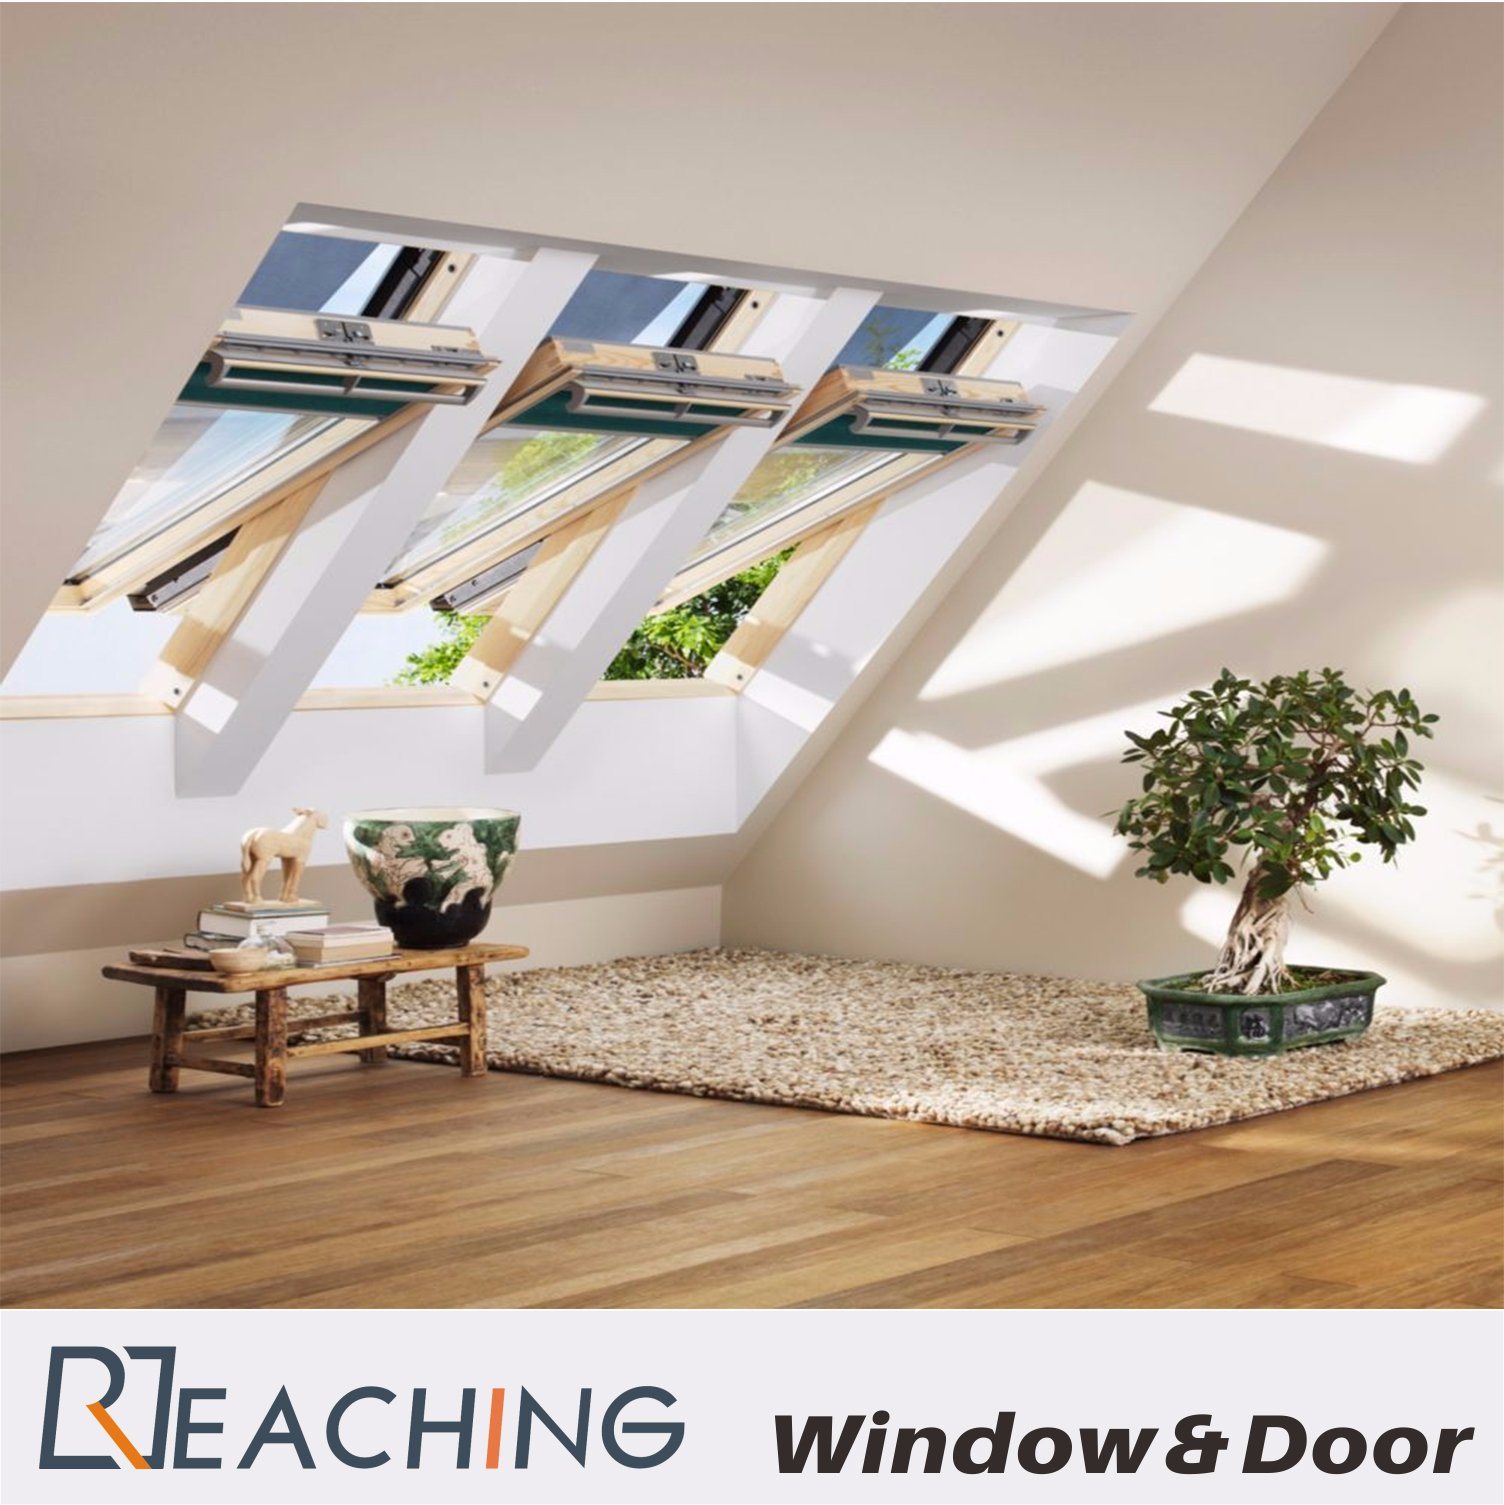 Revolved Window Witth High Clear Tempered Glass Sound Proof Thermal Break Design